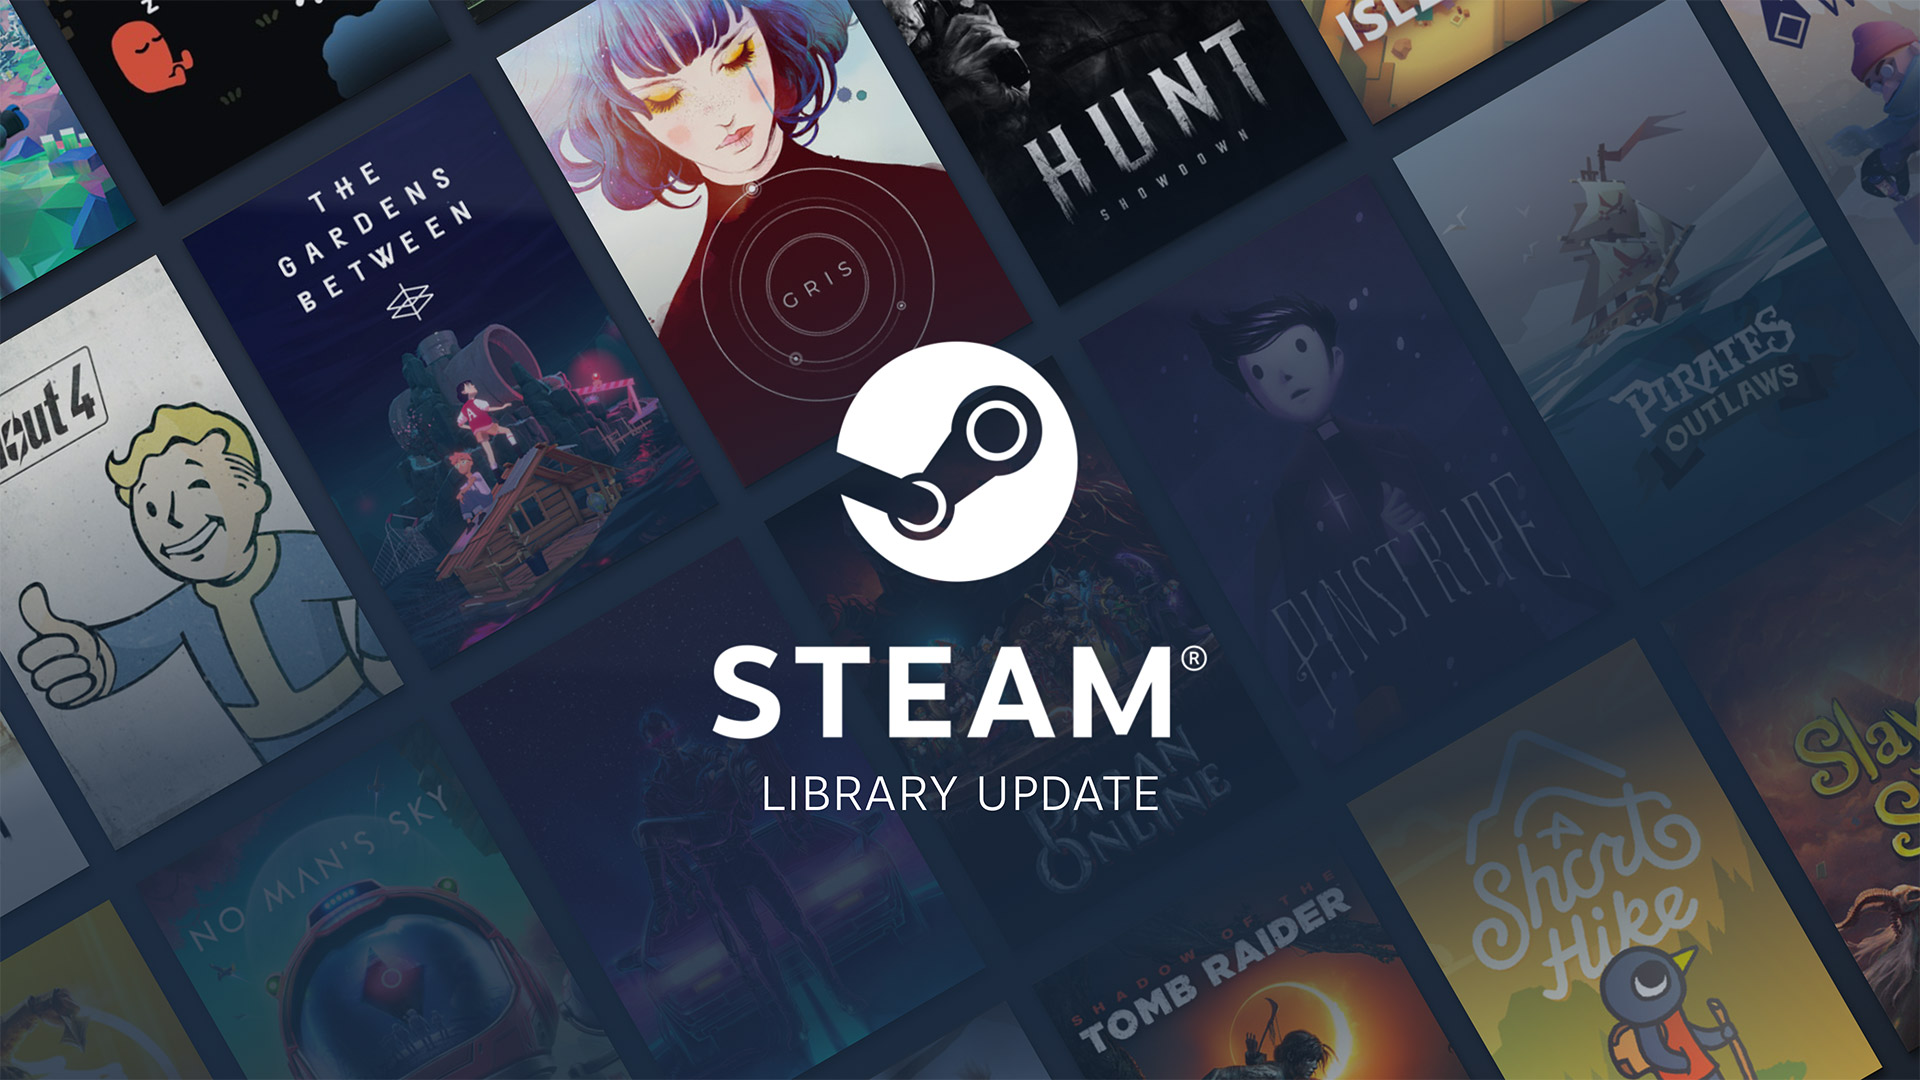 Is there a site or community that will tell me when Steam games